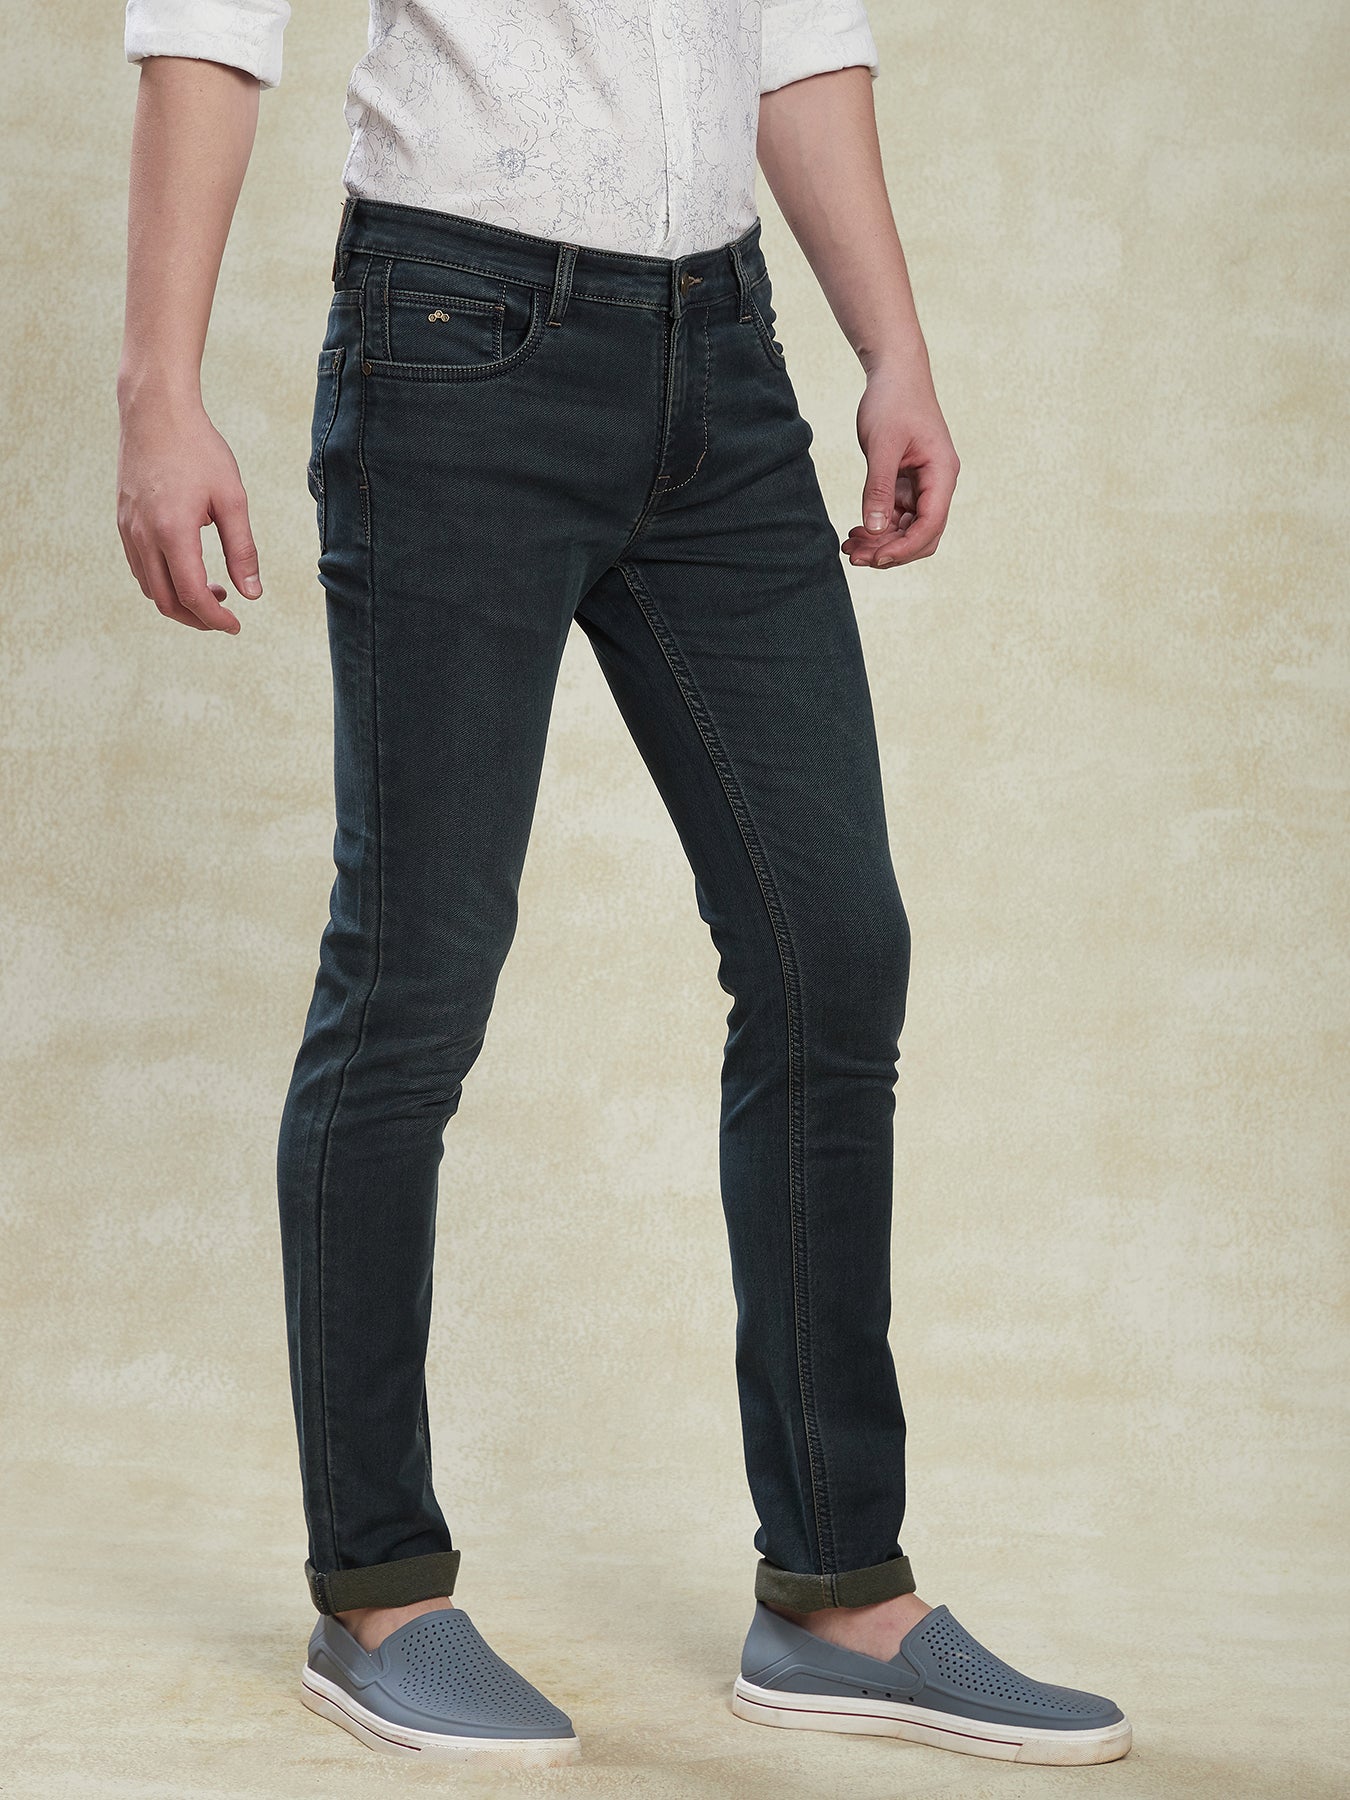 cotton-stretch-dark-blue-narrow-fit-flat-front-casual-mens-jeans